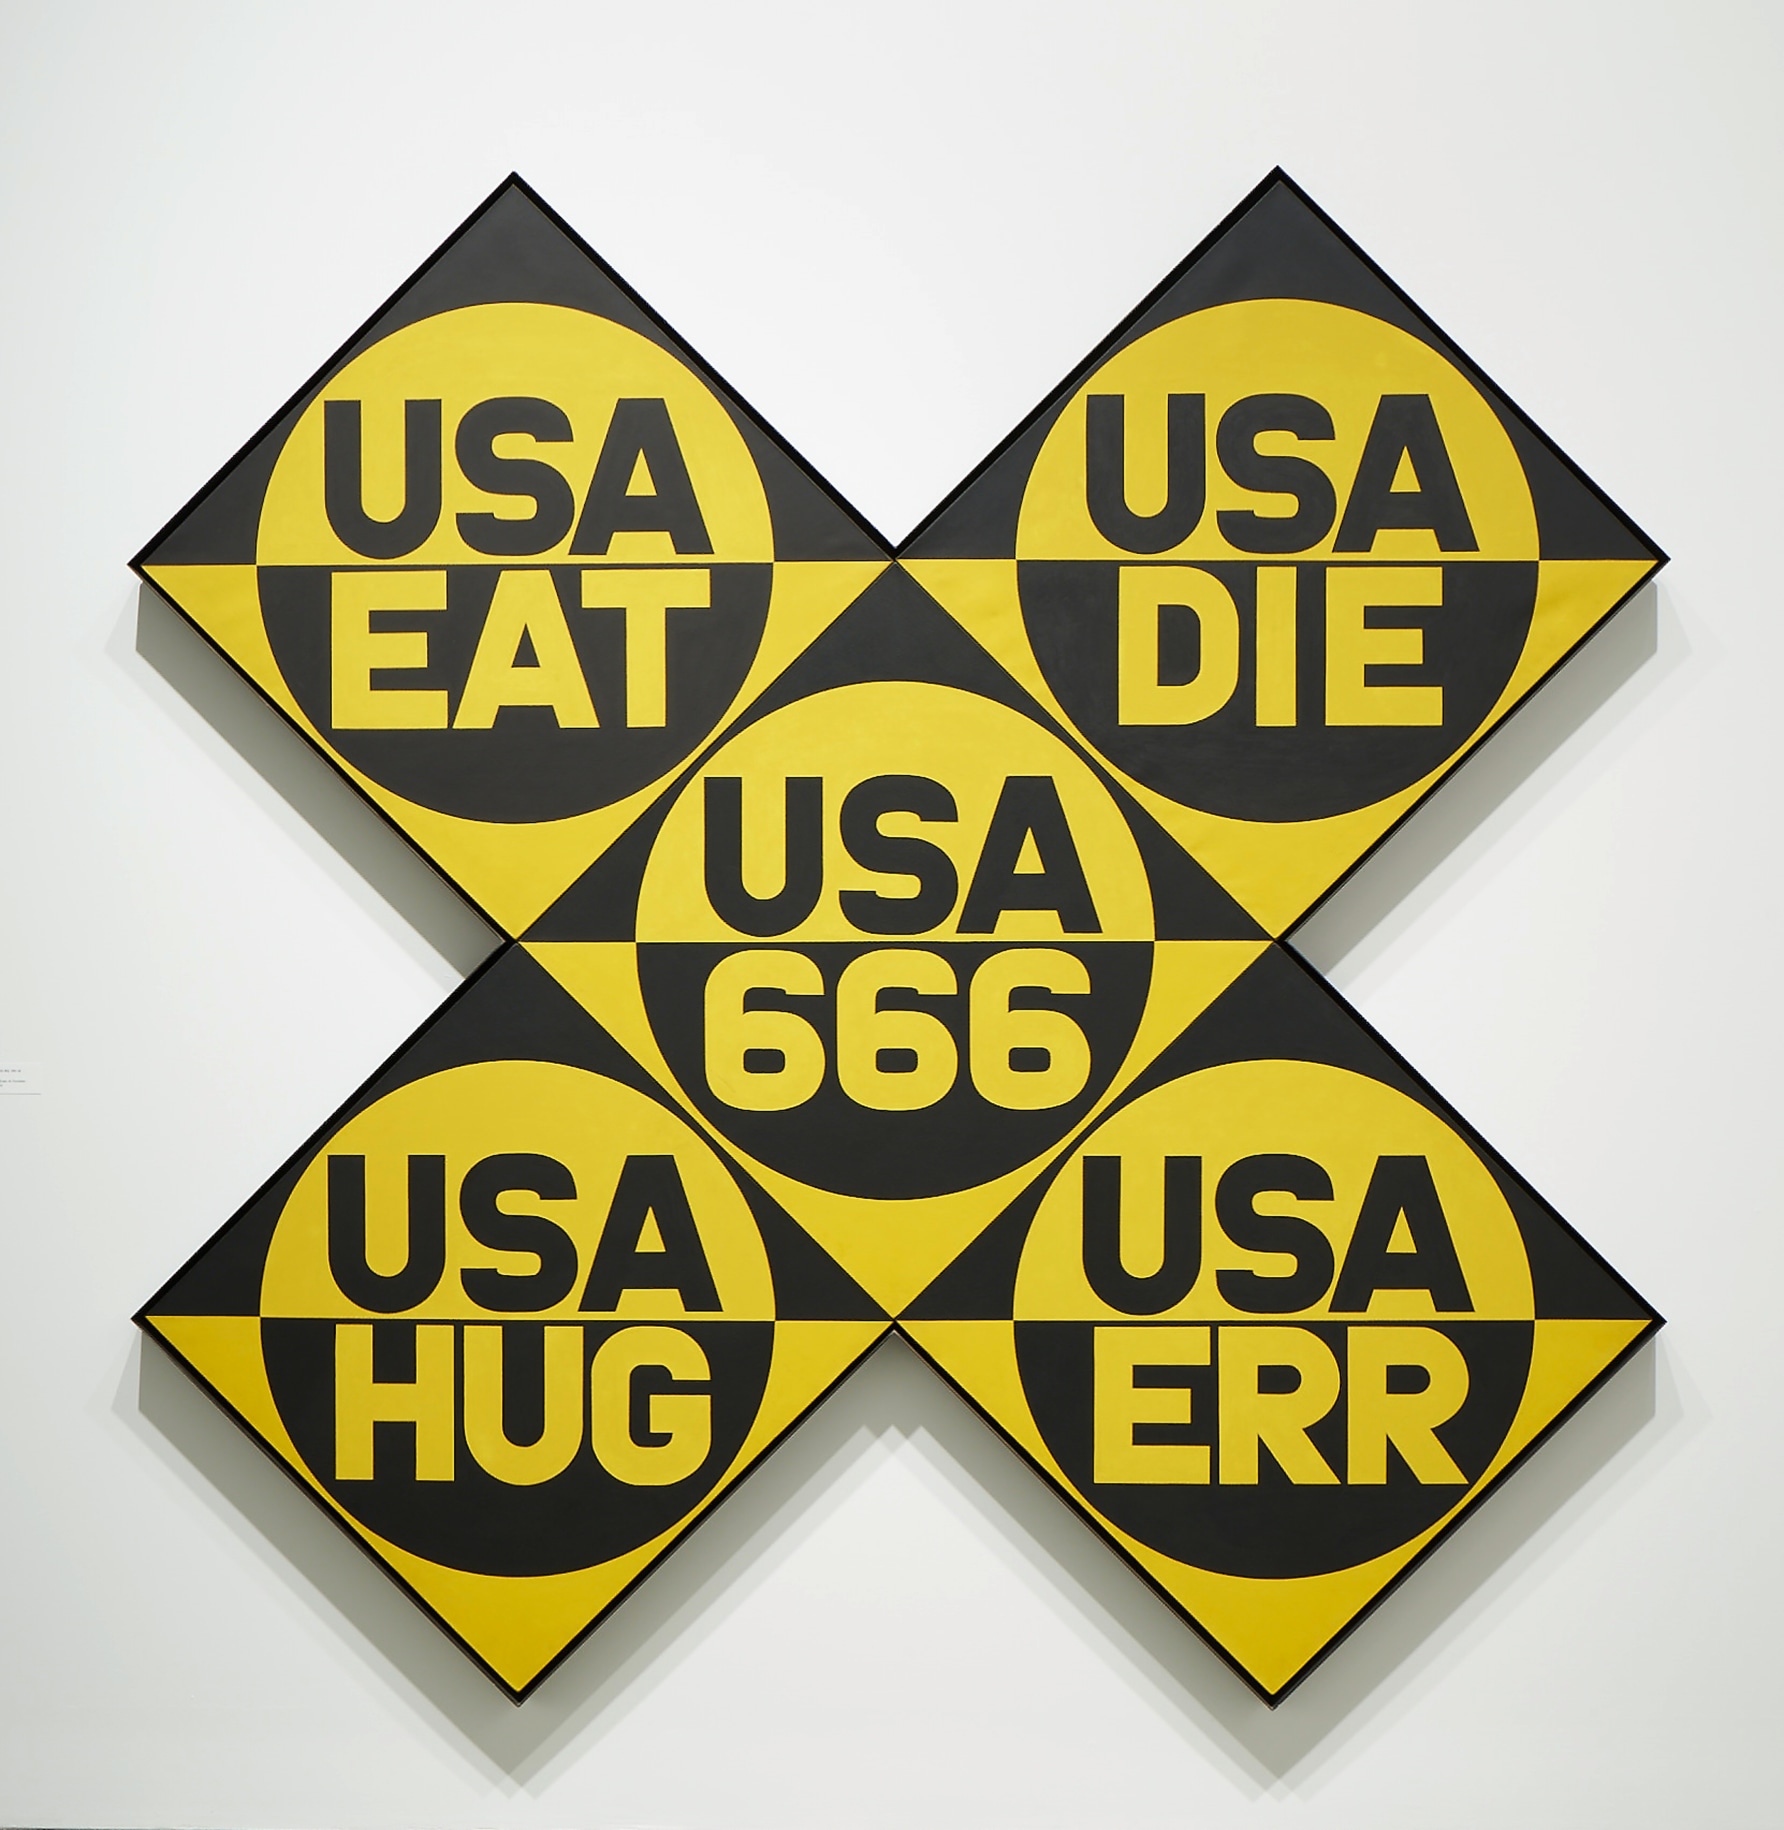 USA 666 (The Sixth American Dream)  is a yellow and black x-format painting, made up of five panels and measuring 102 by 102 inches overall. Each panel has a circle divided in two, the top half yellow with USA painted in black, and the bottom black with a yellow word. The words are, clockwise from top left, &quot;EAT,&quot;&quot;DIE,&quot; &quot;ERR,&quot; &quot;HUG,&quot; and in the central panel &quot;666.&quot;